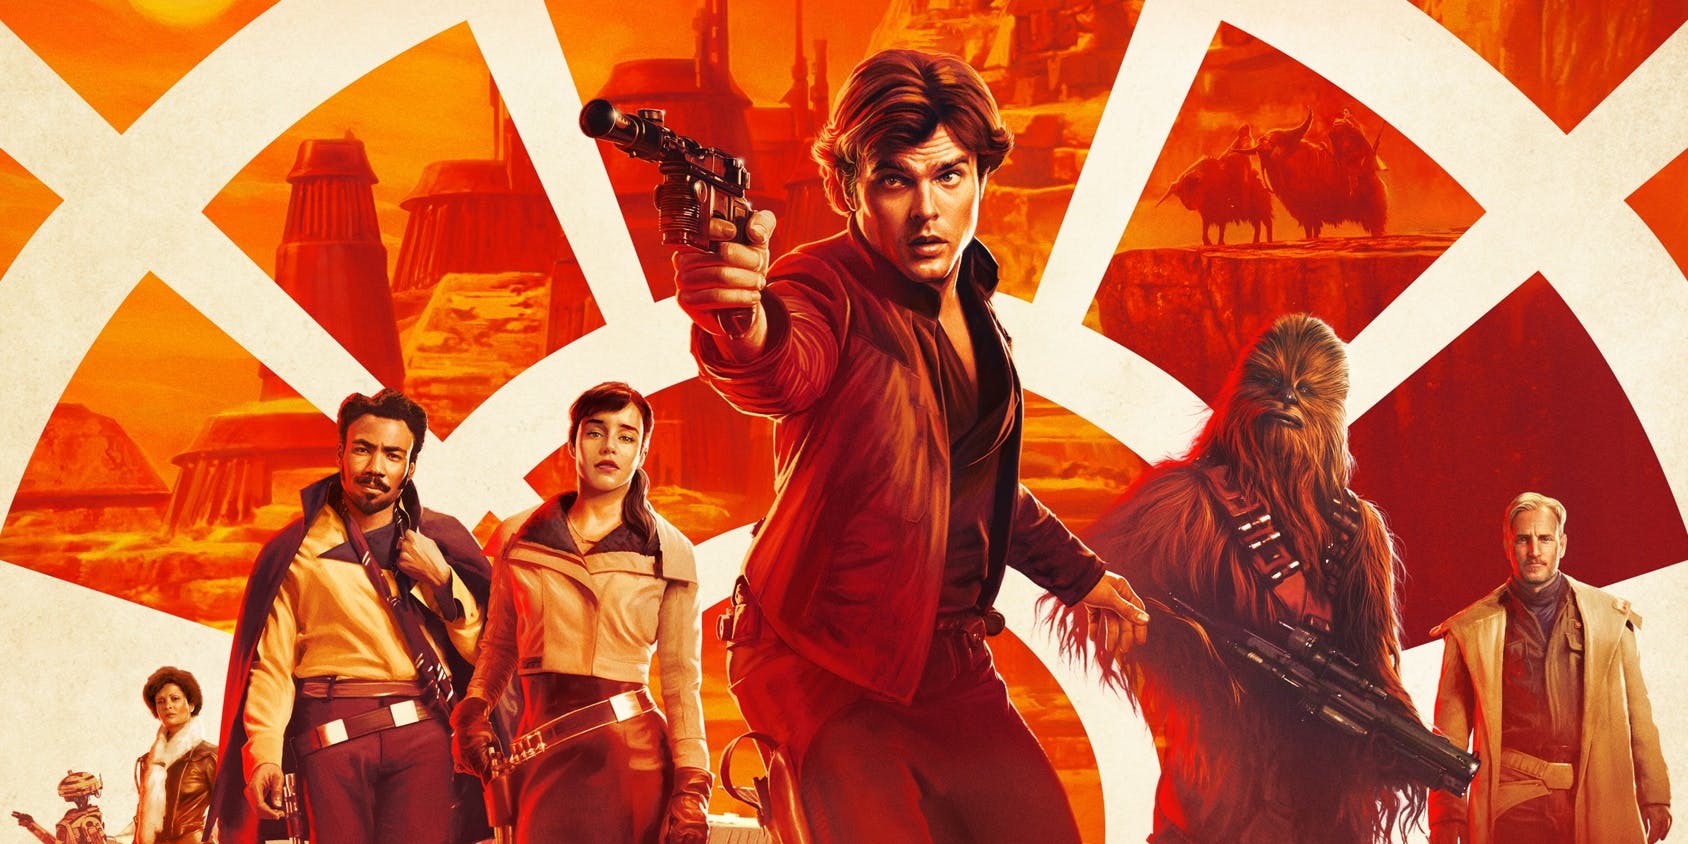 solo-star-wars-story-poster-cropped.jpg